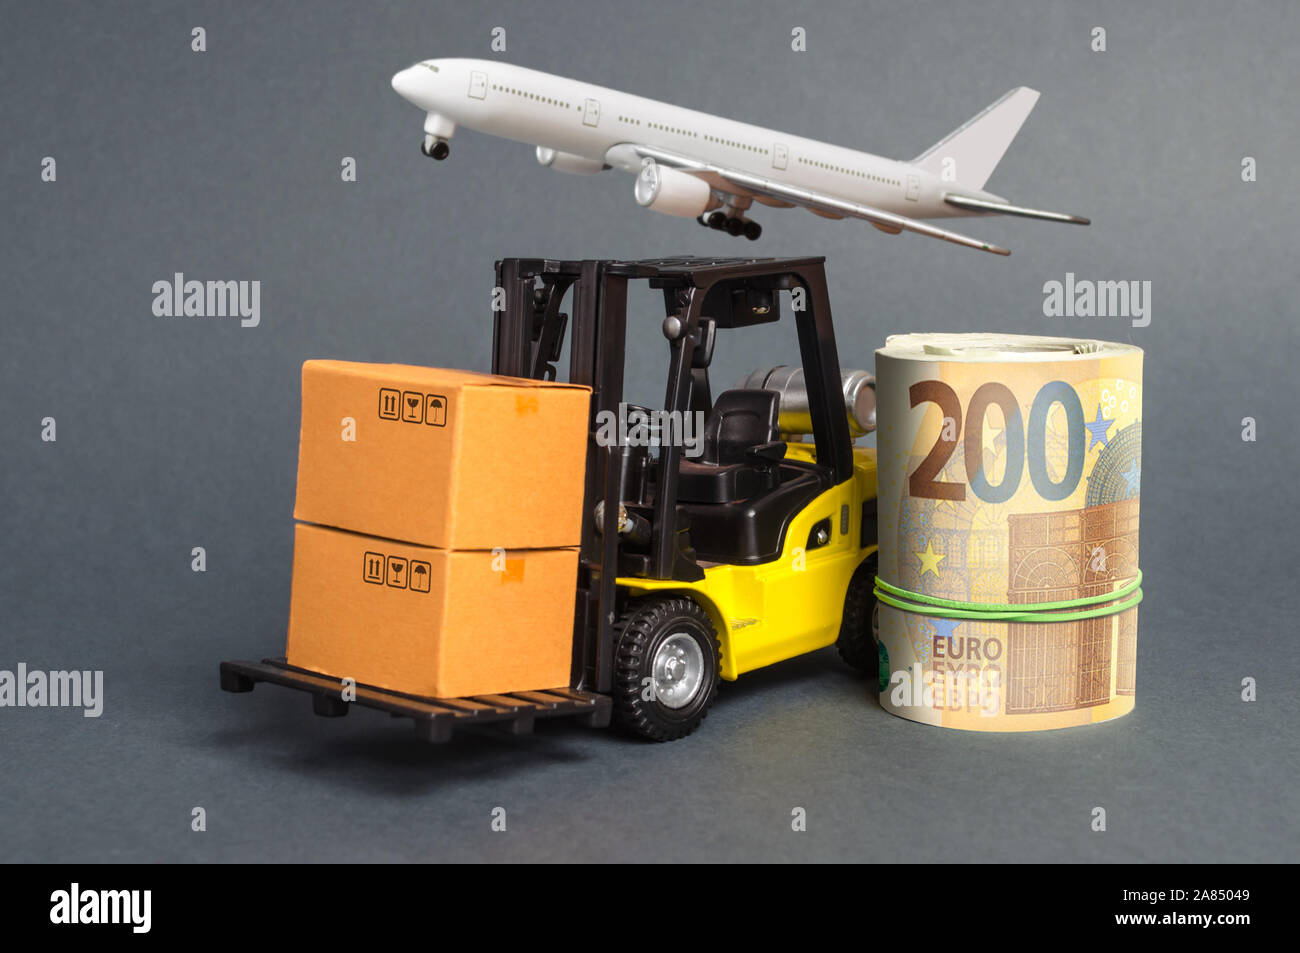 A forklift truck carries cardboard boxes and Euros roll. Transport company. Performance efficient. Trade and production of products and goods, balance Stock Photo